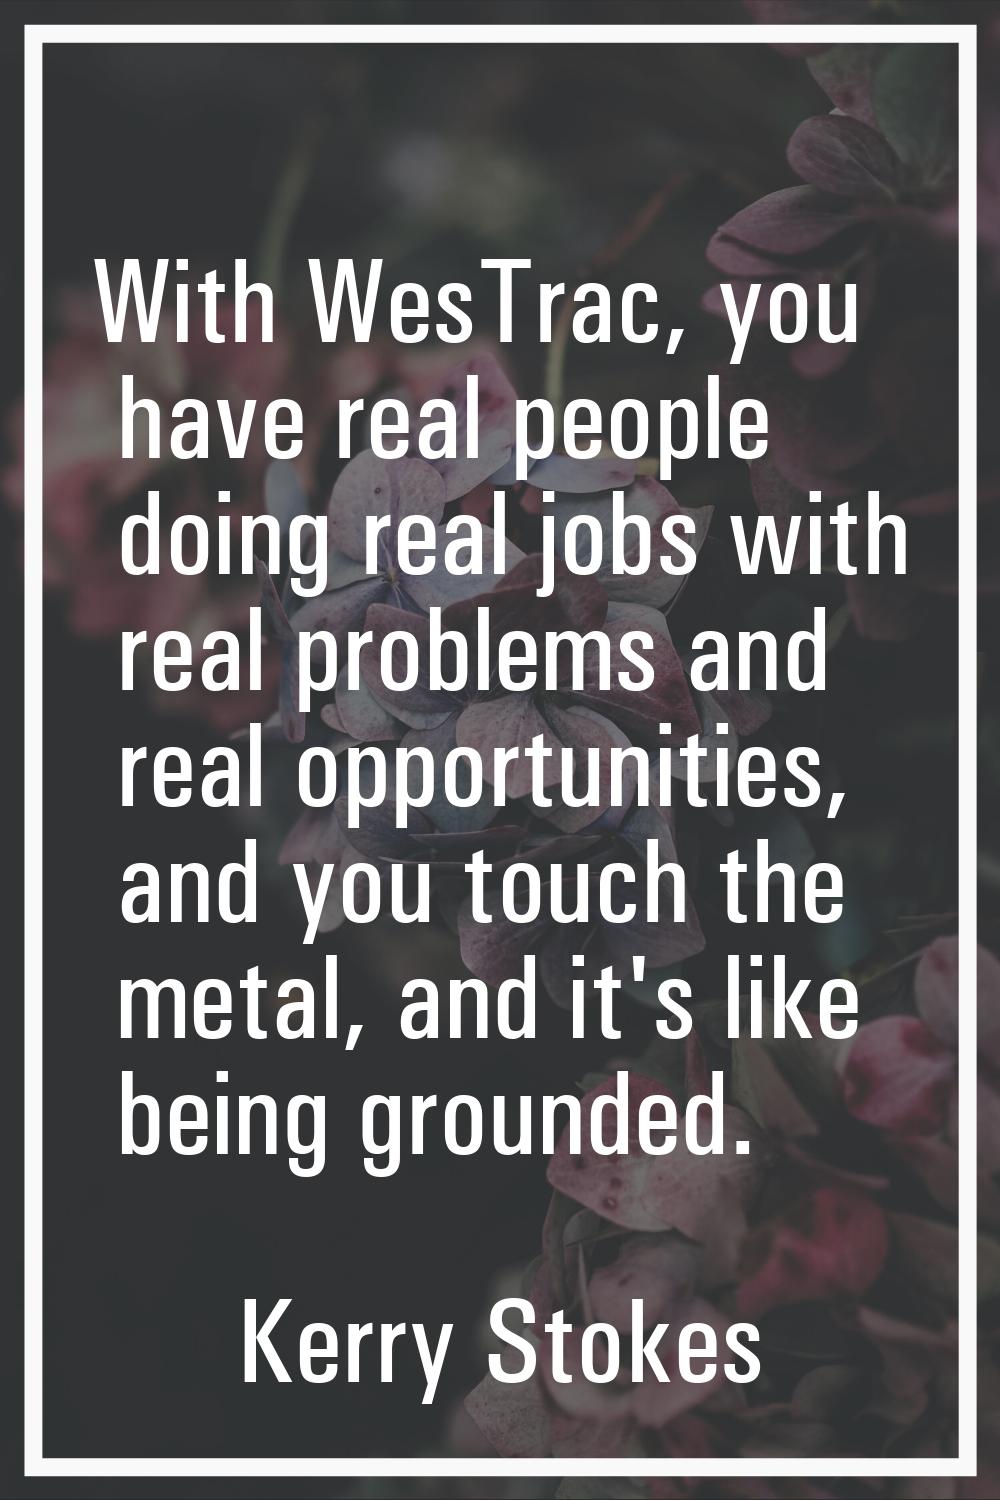 With WesTrac, you have real people doing real jobs with real problems and real opportunities, and y